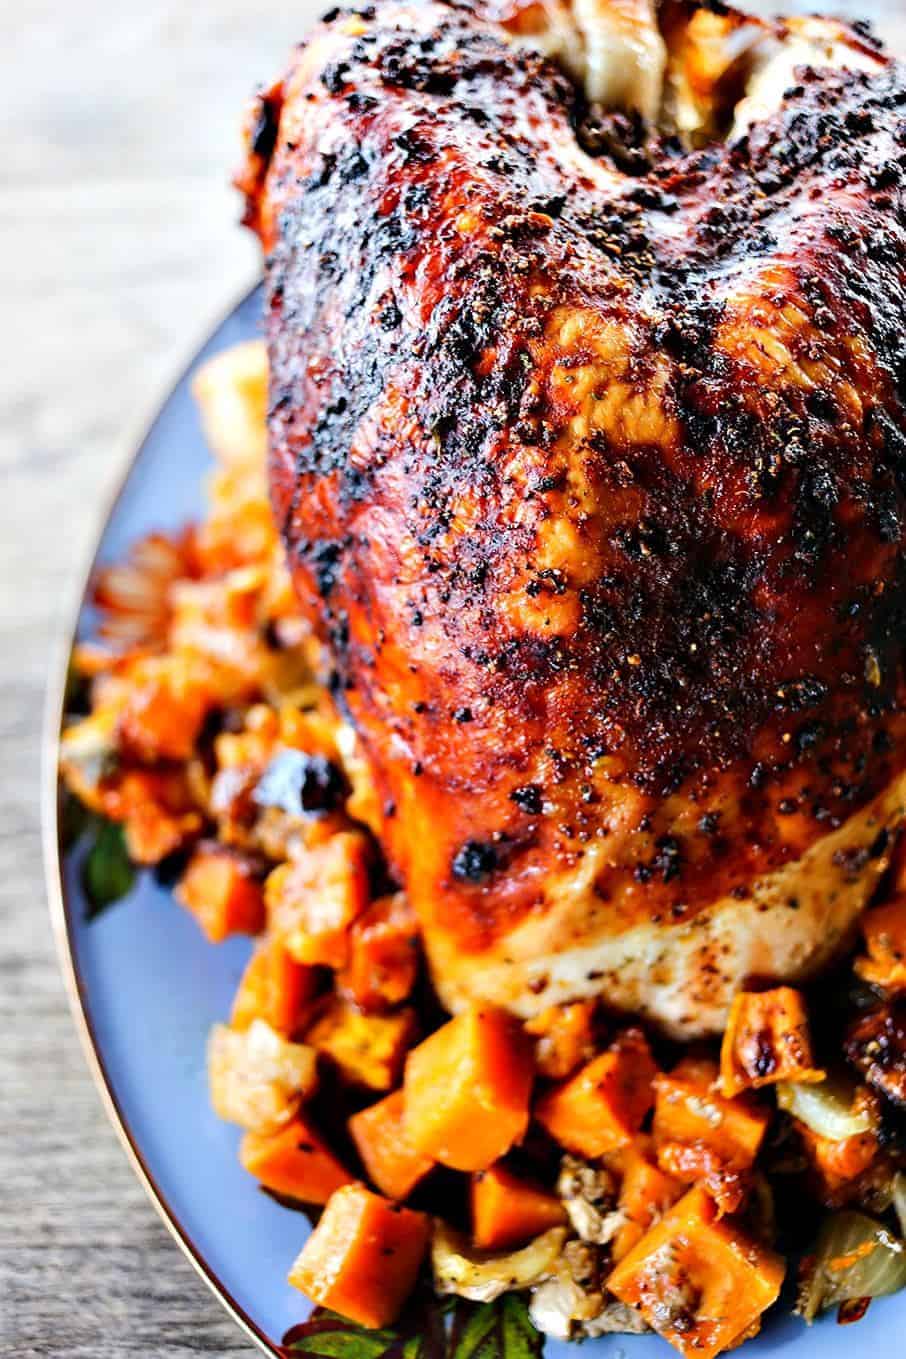 https://www.foodiewithfamily.com/wp-content/uploads/2050/10/Turkey-Breast-Dinner-With-Sweet-Potatoes.jpg